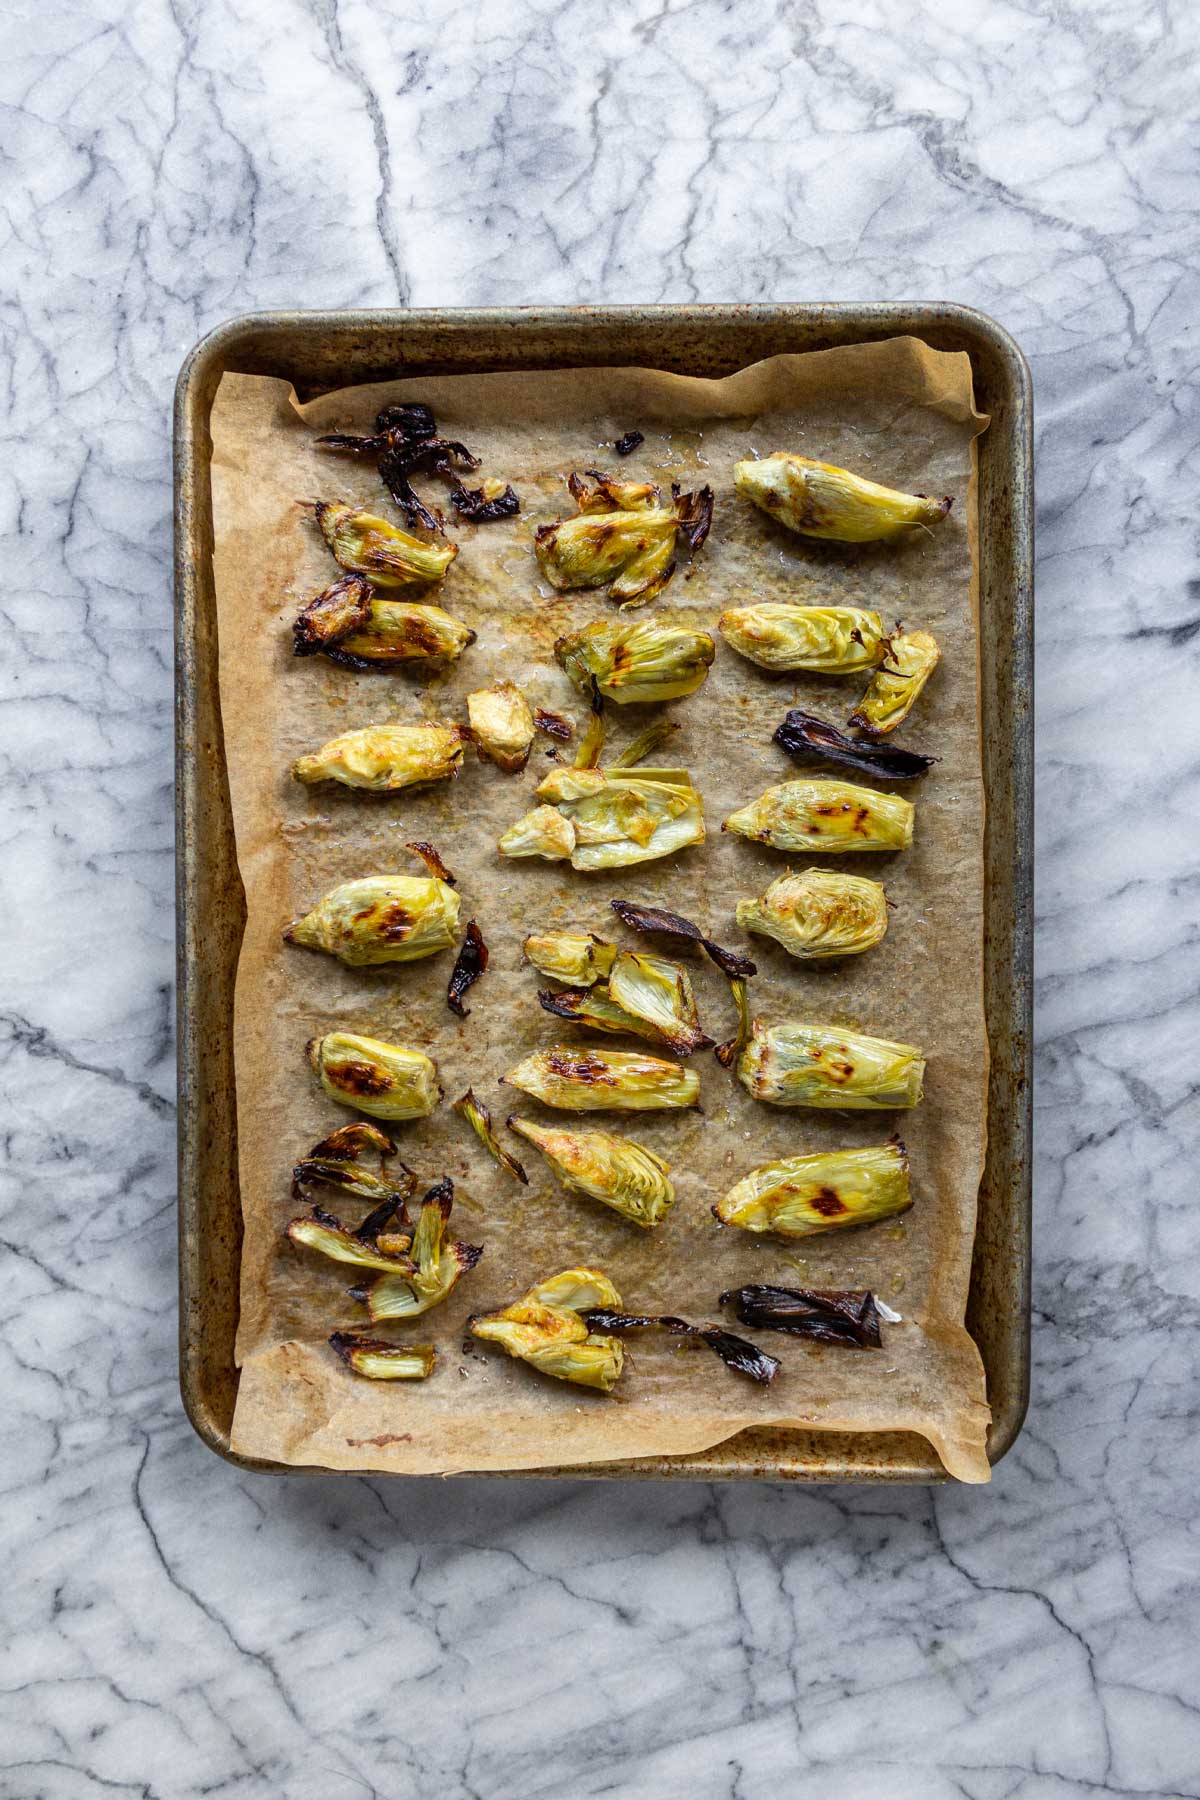 A baking sheet lined with parchment paper, with crispy baked artichoke hearts uniformly spaced on it.